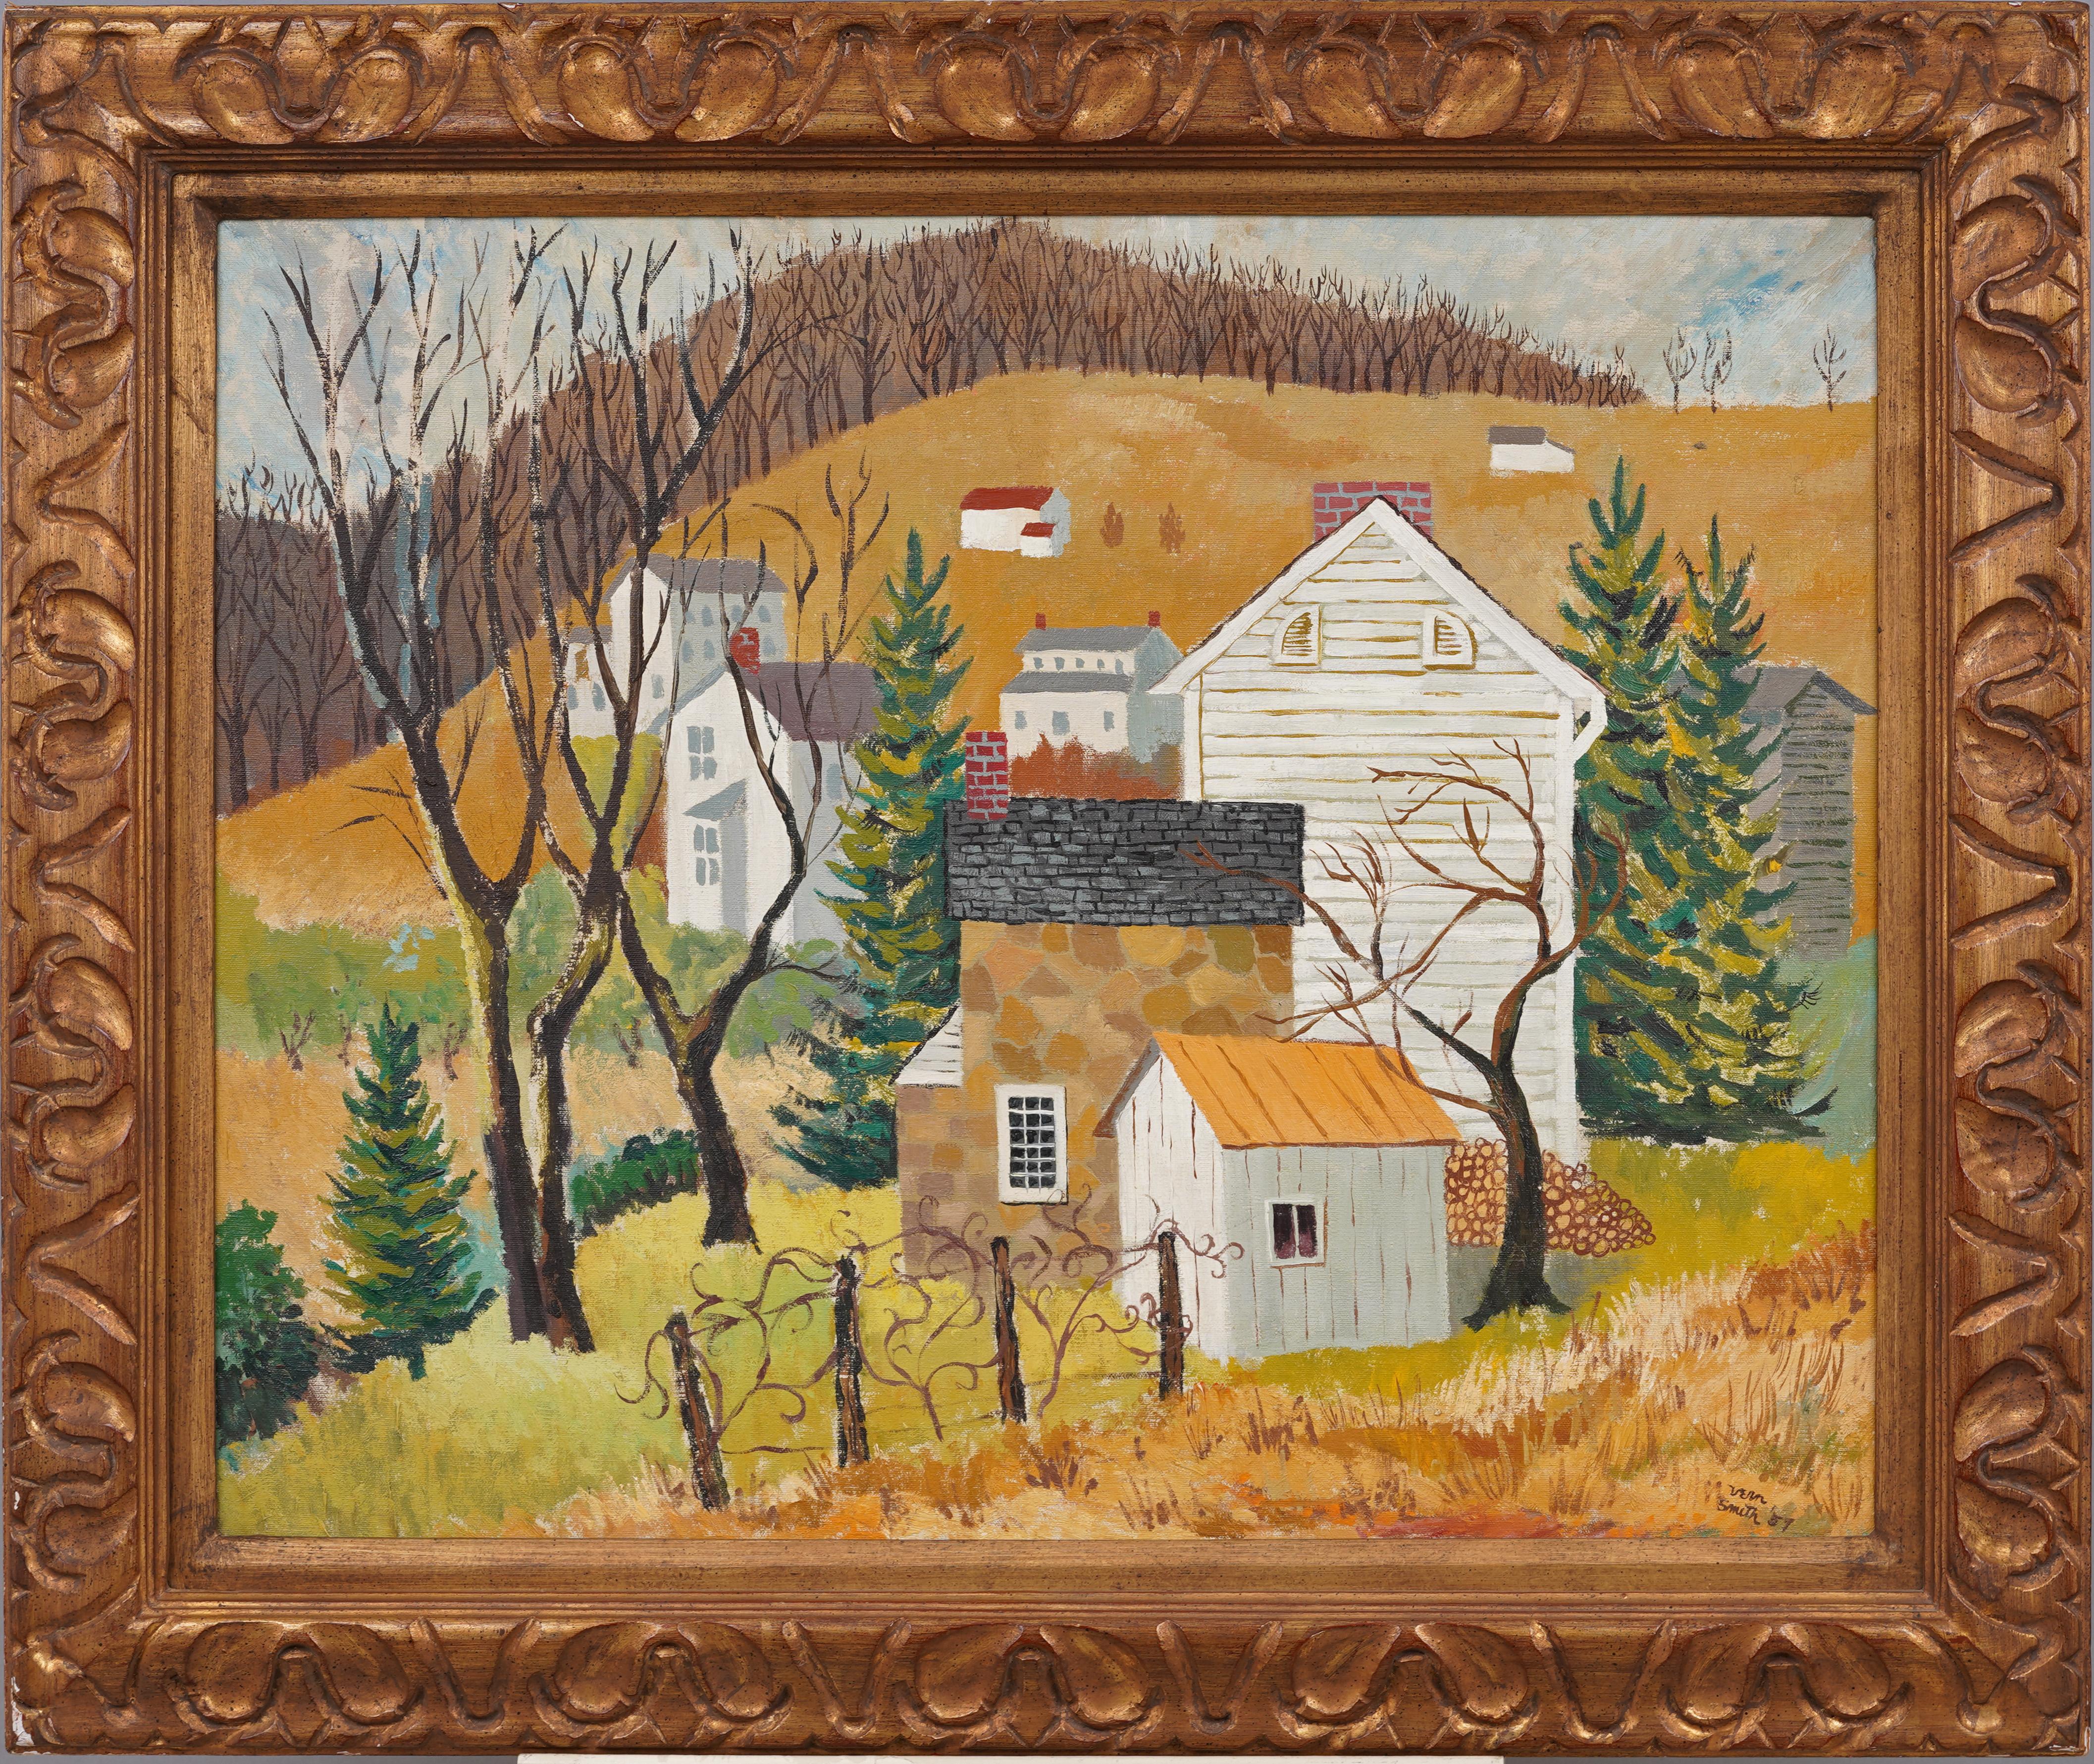 Vern Henry Smith Abstract Painting - Antique American Modernist Landscape Framed New England FallOil Painting